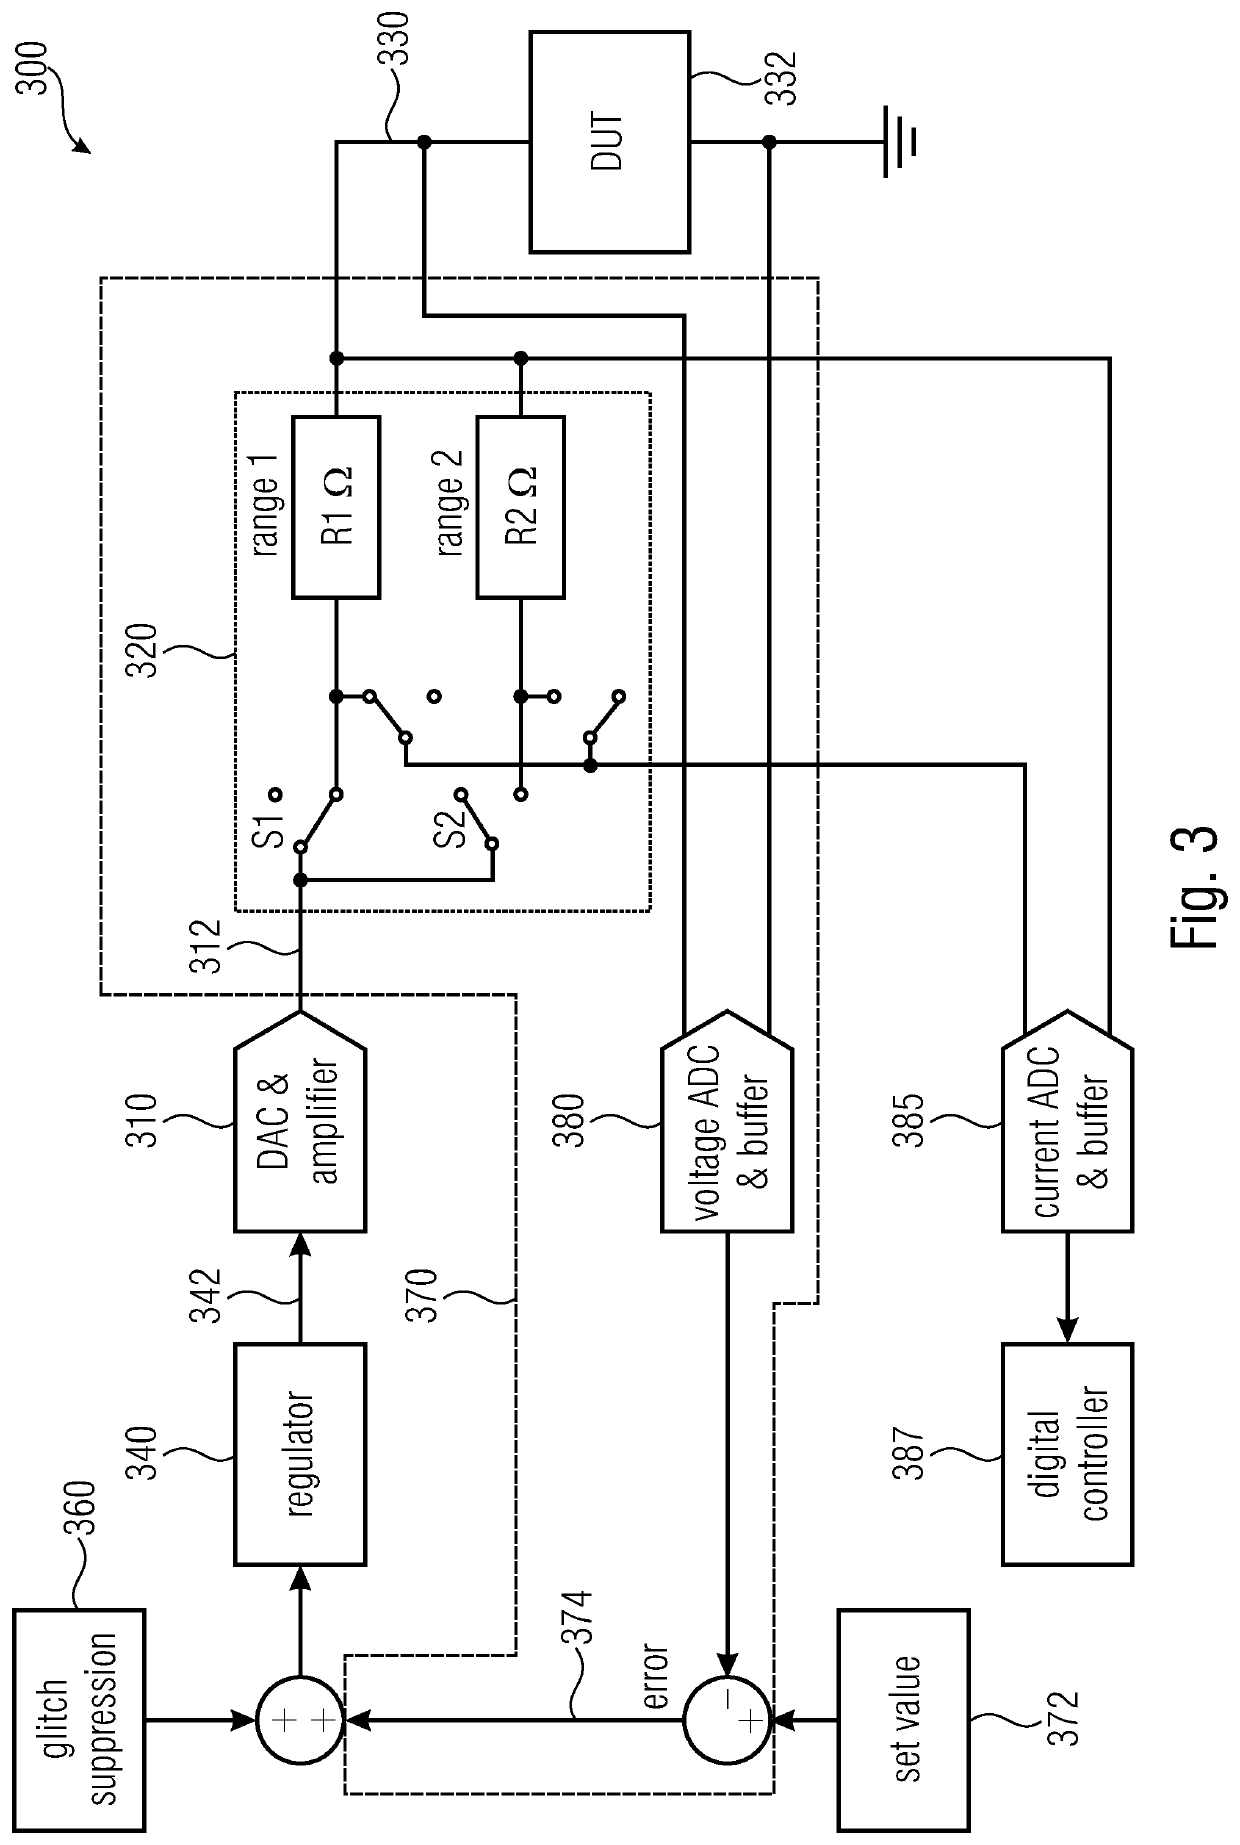 Apparatus and method for providing a supply voltage to a device under test using a compensation signal injection